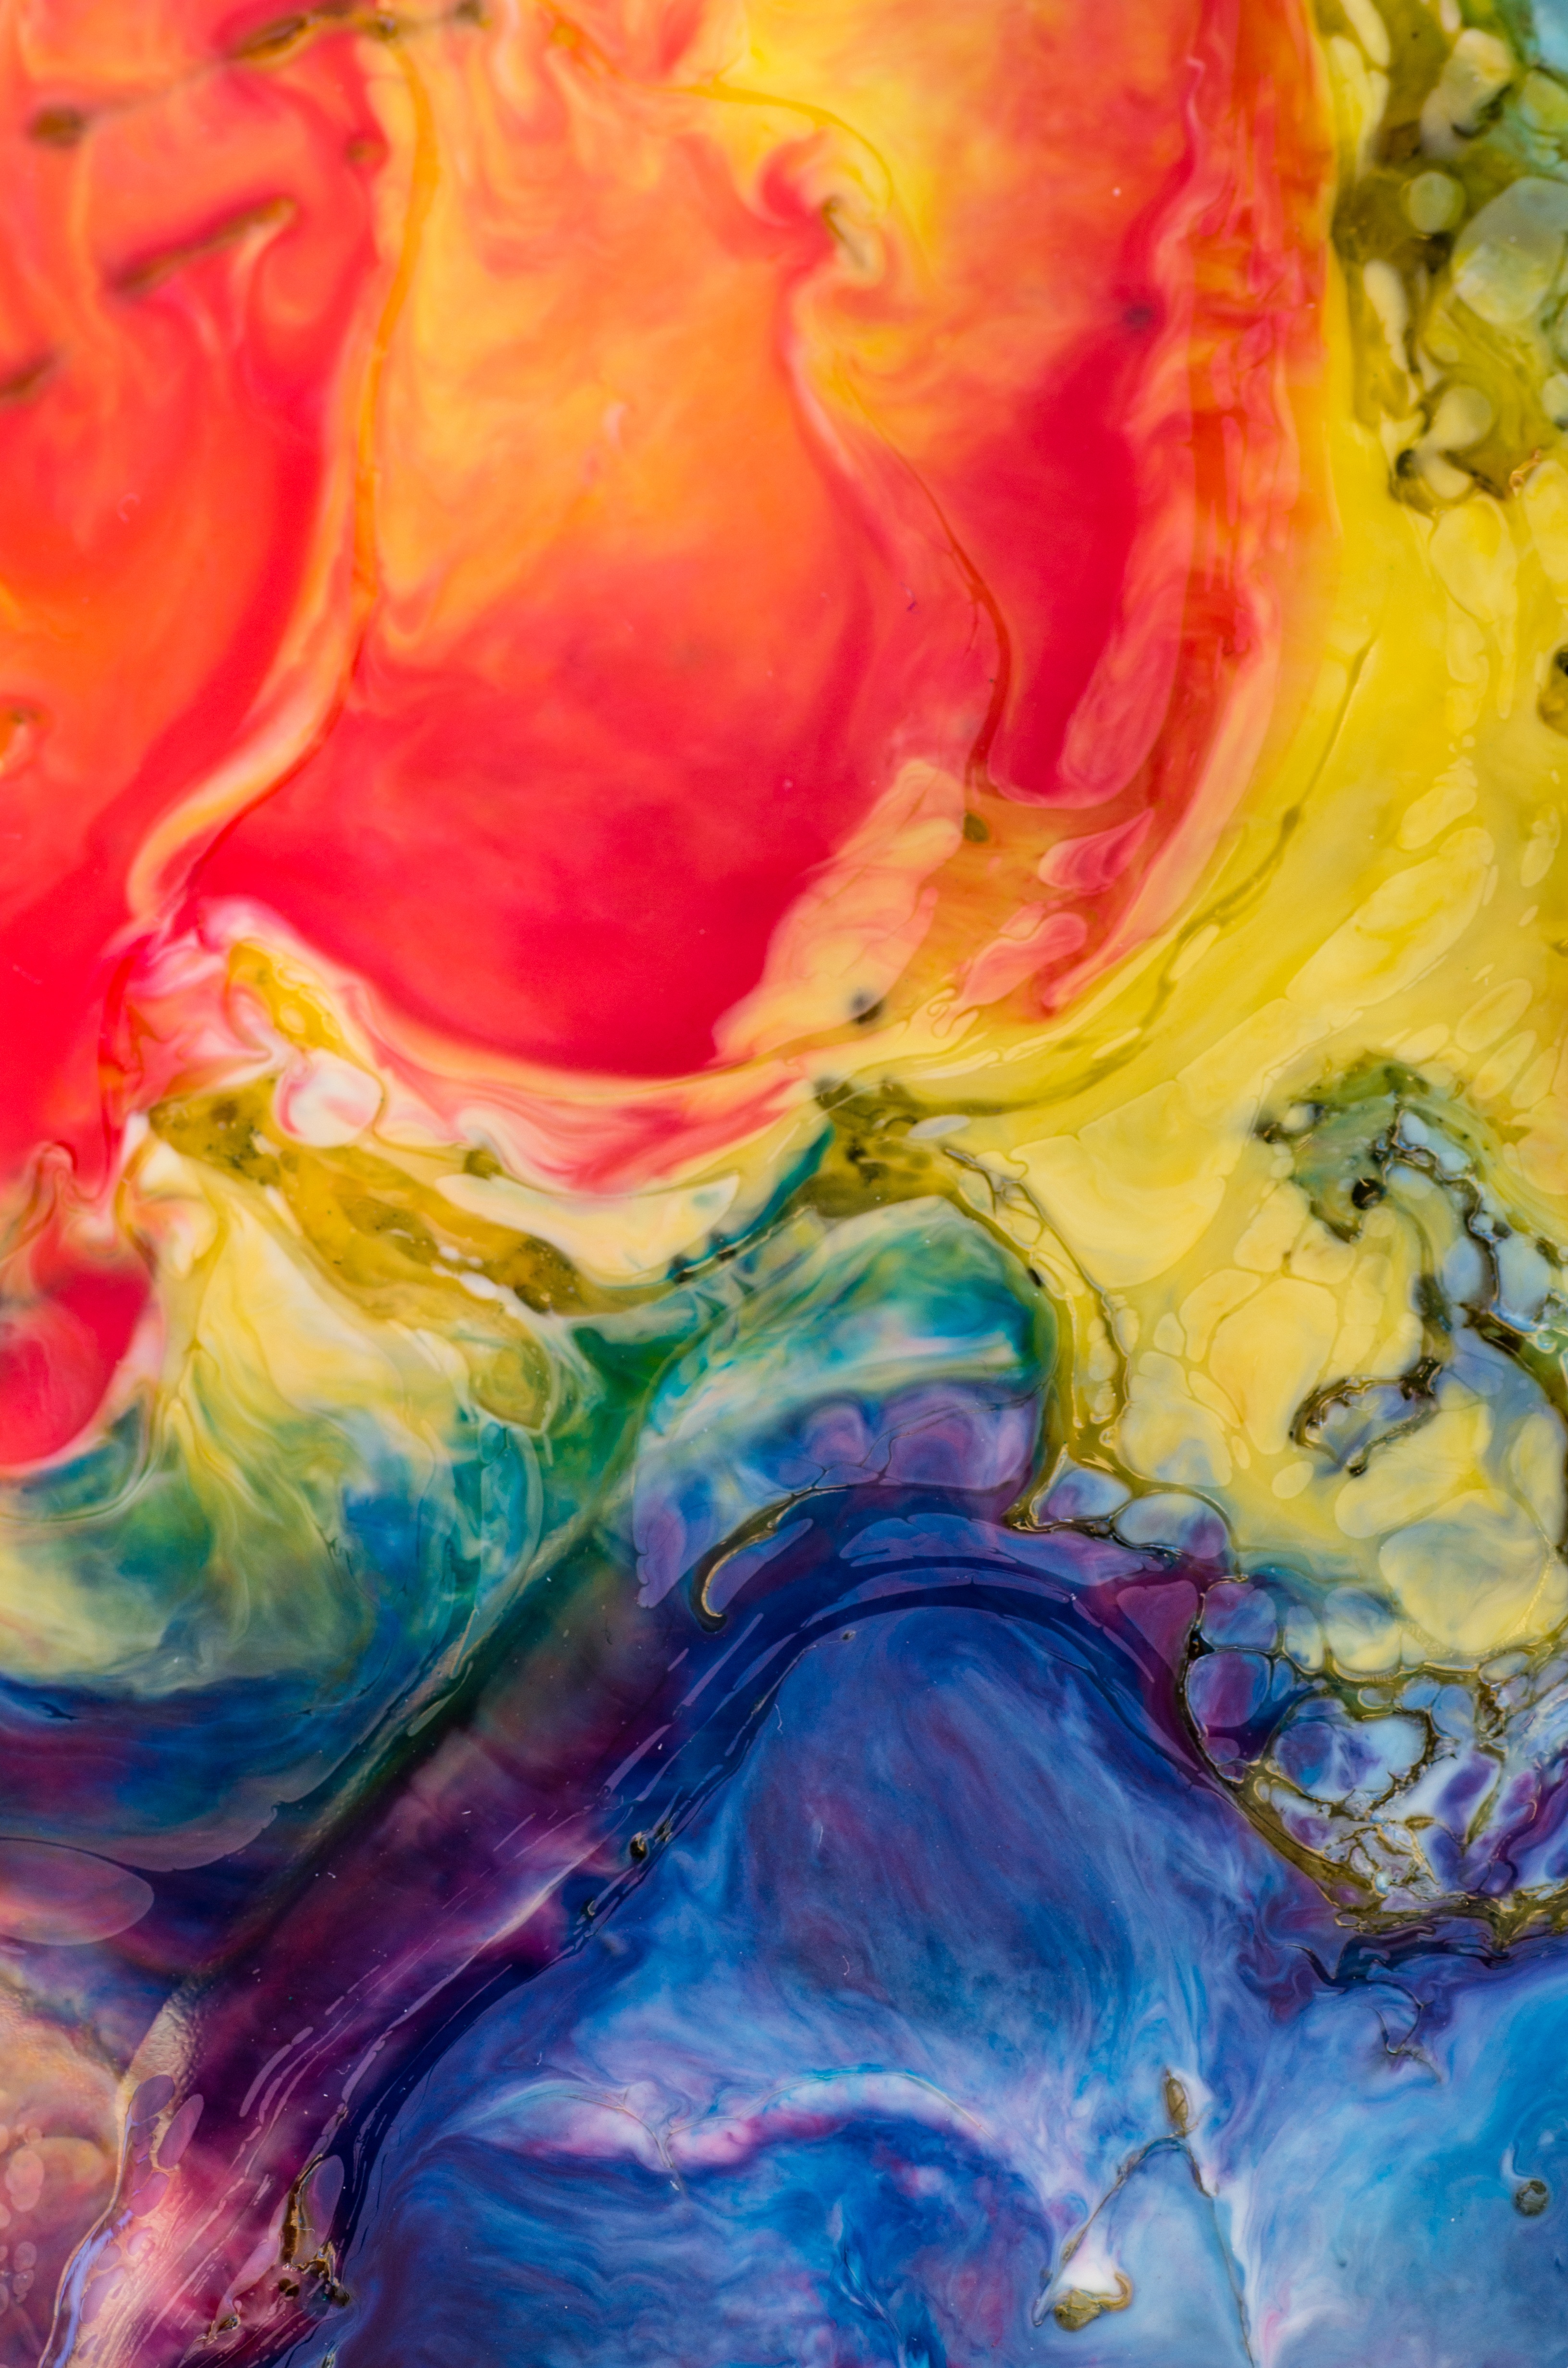 colourful, colorful, motley, abstract, multicolored, paint, stains, spots Full HD